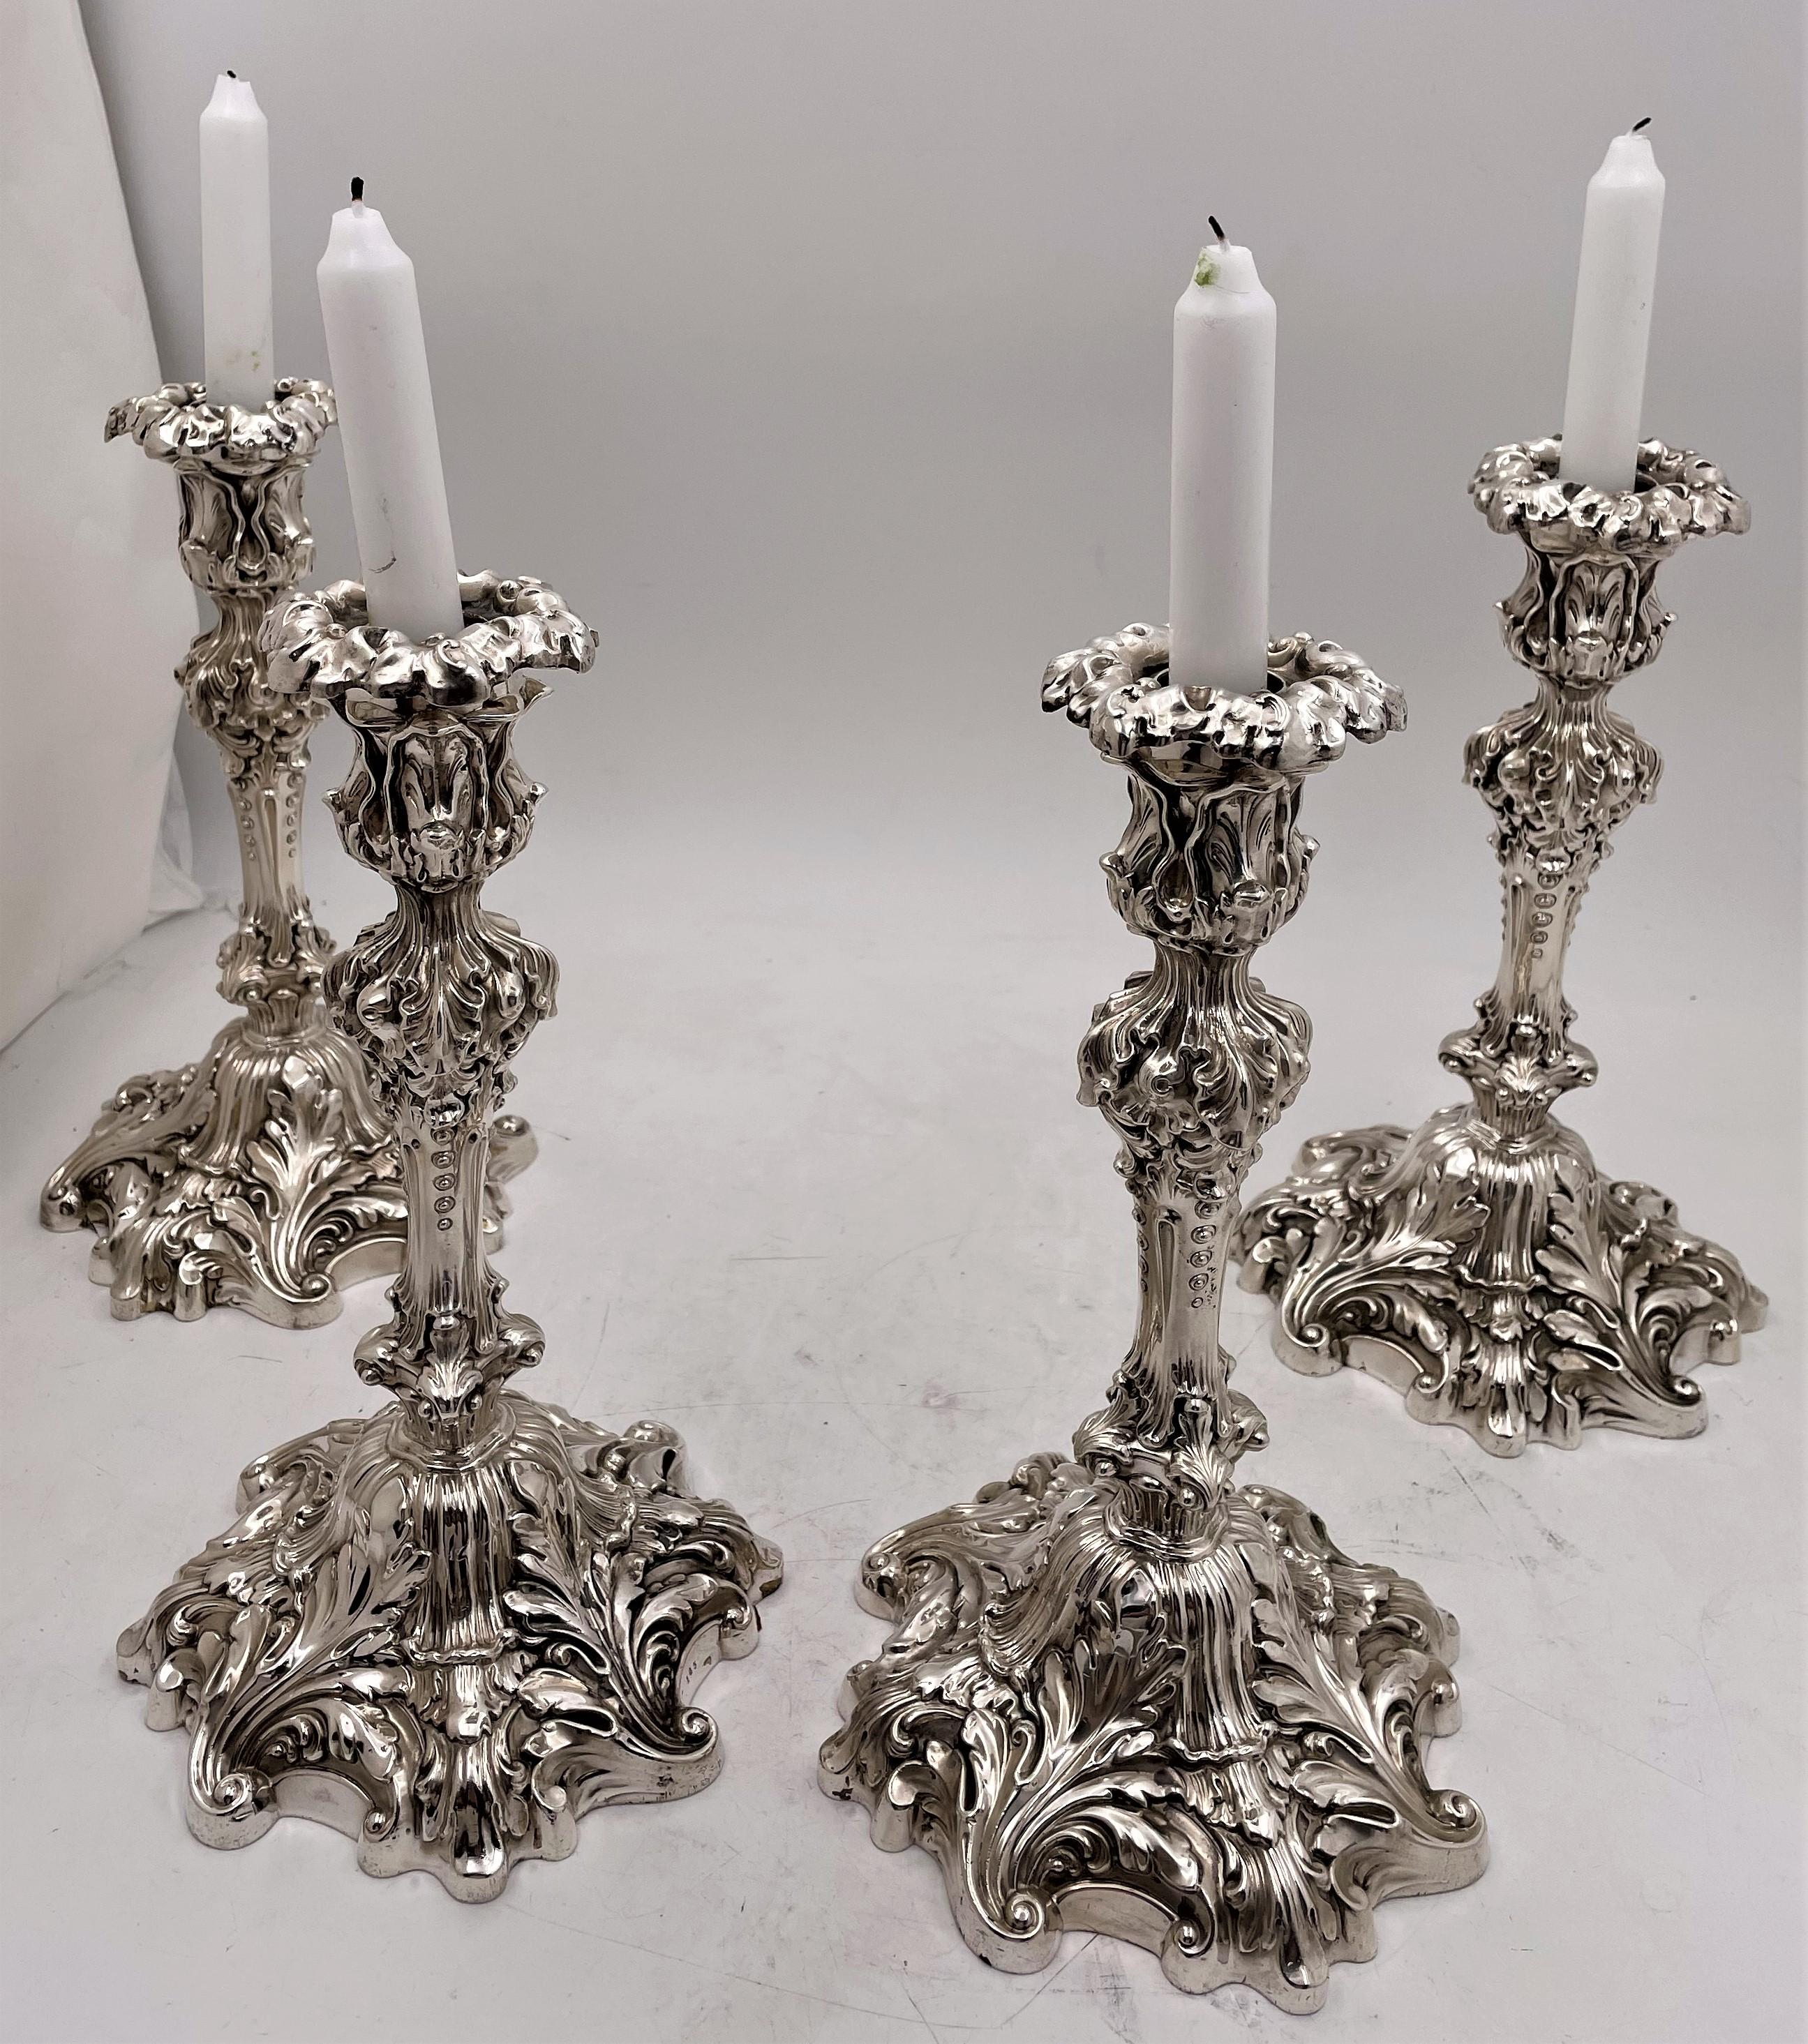 American Set of 4 Howard & Co. Sterling Silver 1901 Candlesticks in Baroque Revival Style For Sale